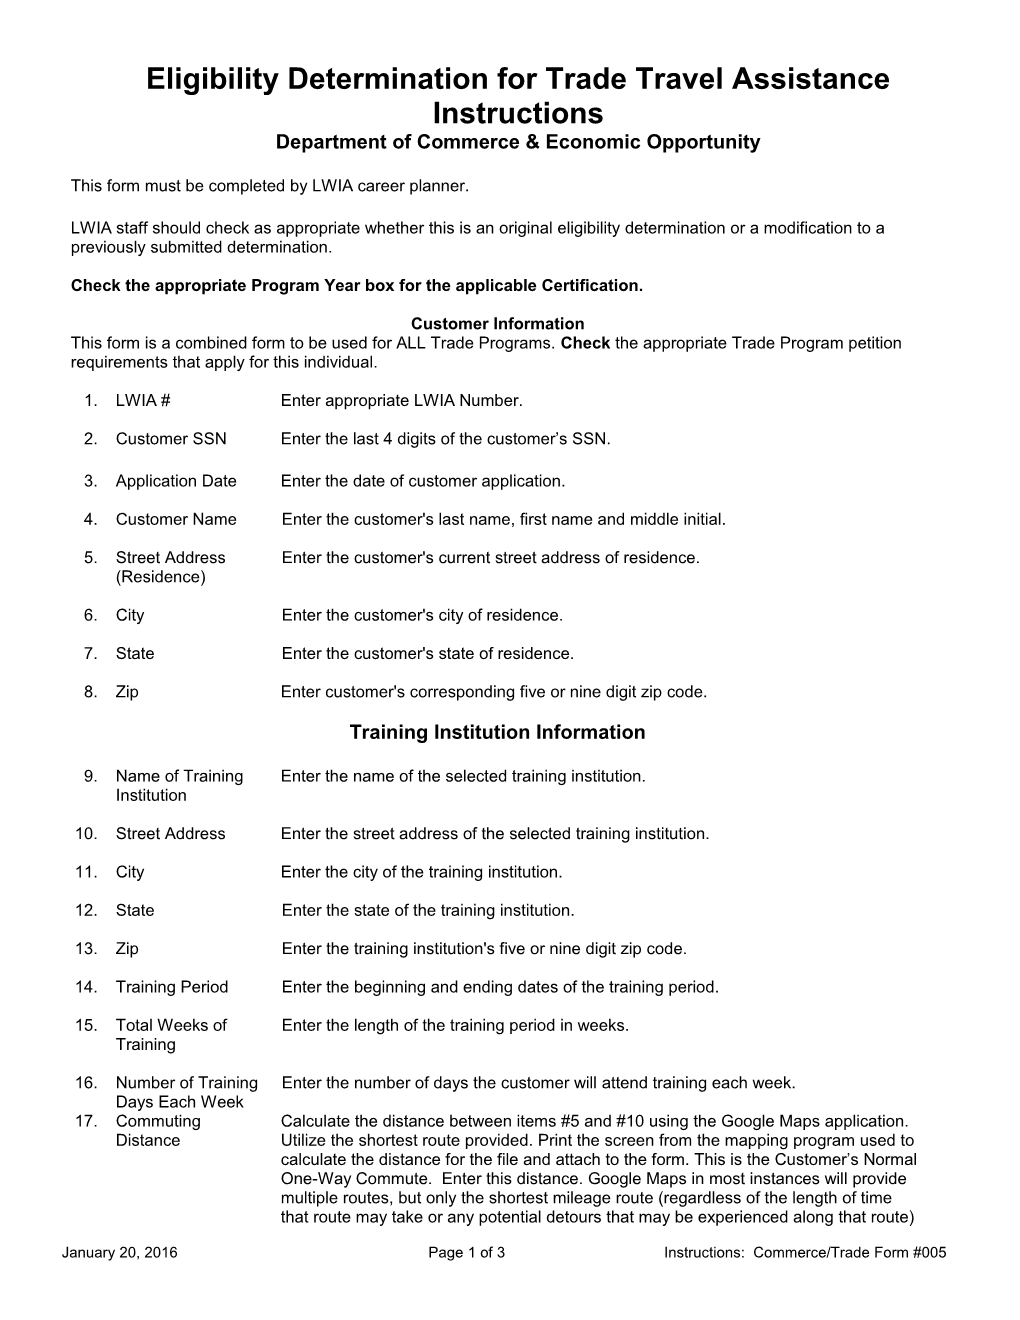 Form #005 Eligibility Determination for Trade Travel Assistance Instructions (MS Word) 3-01-14